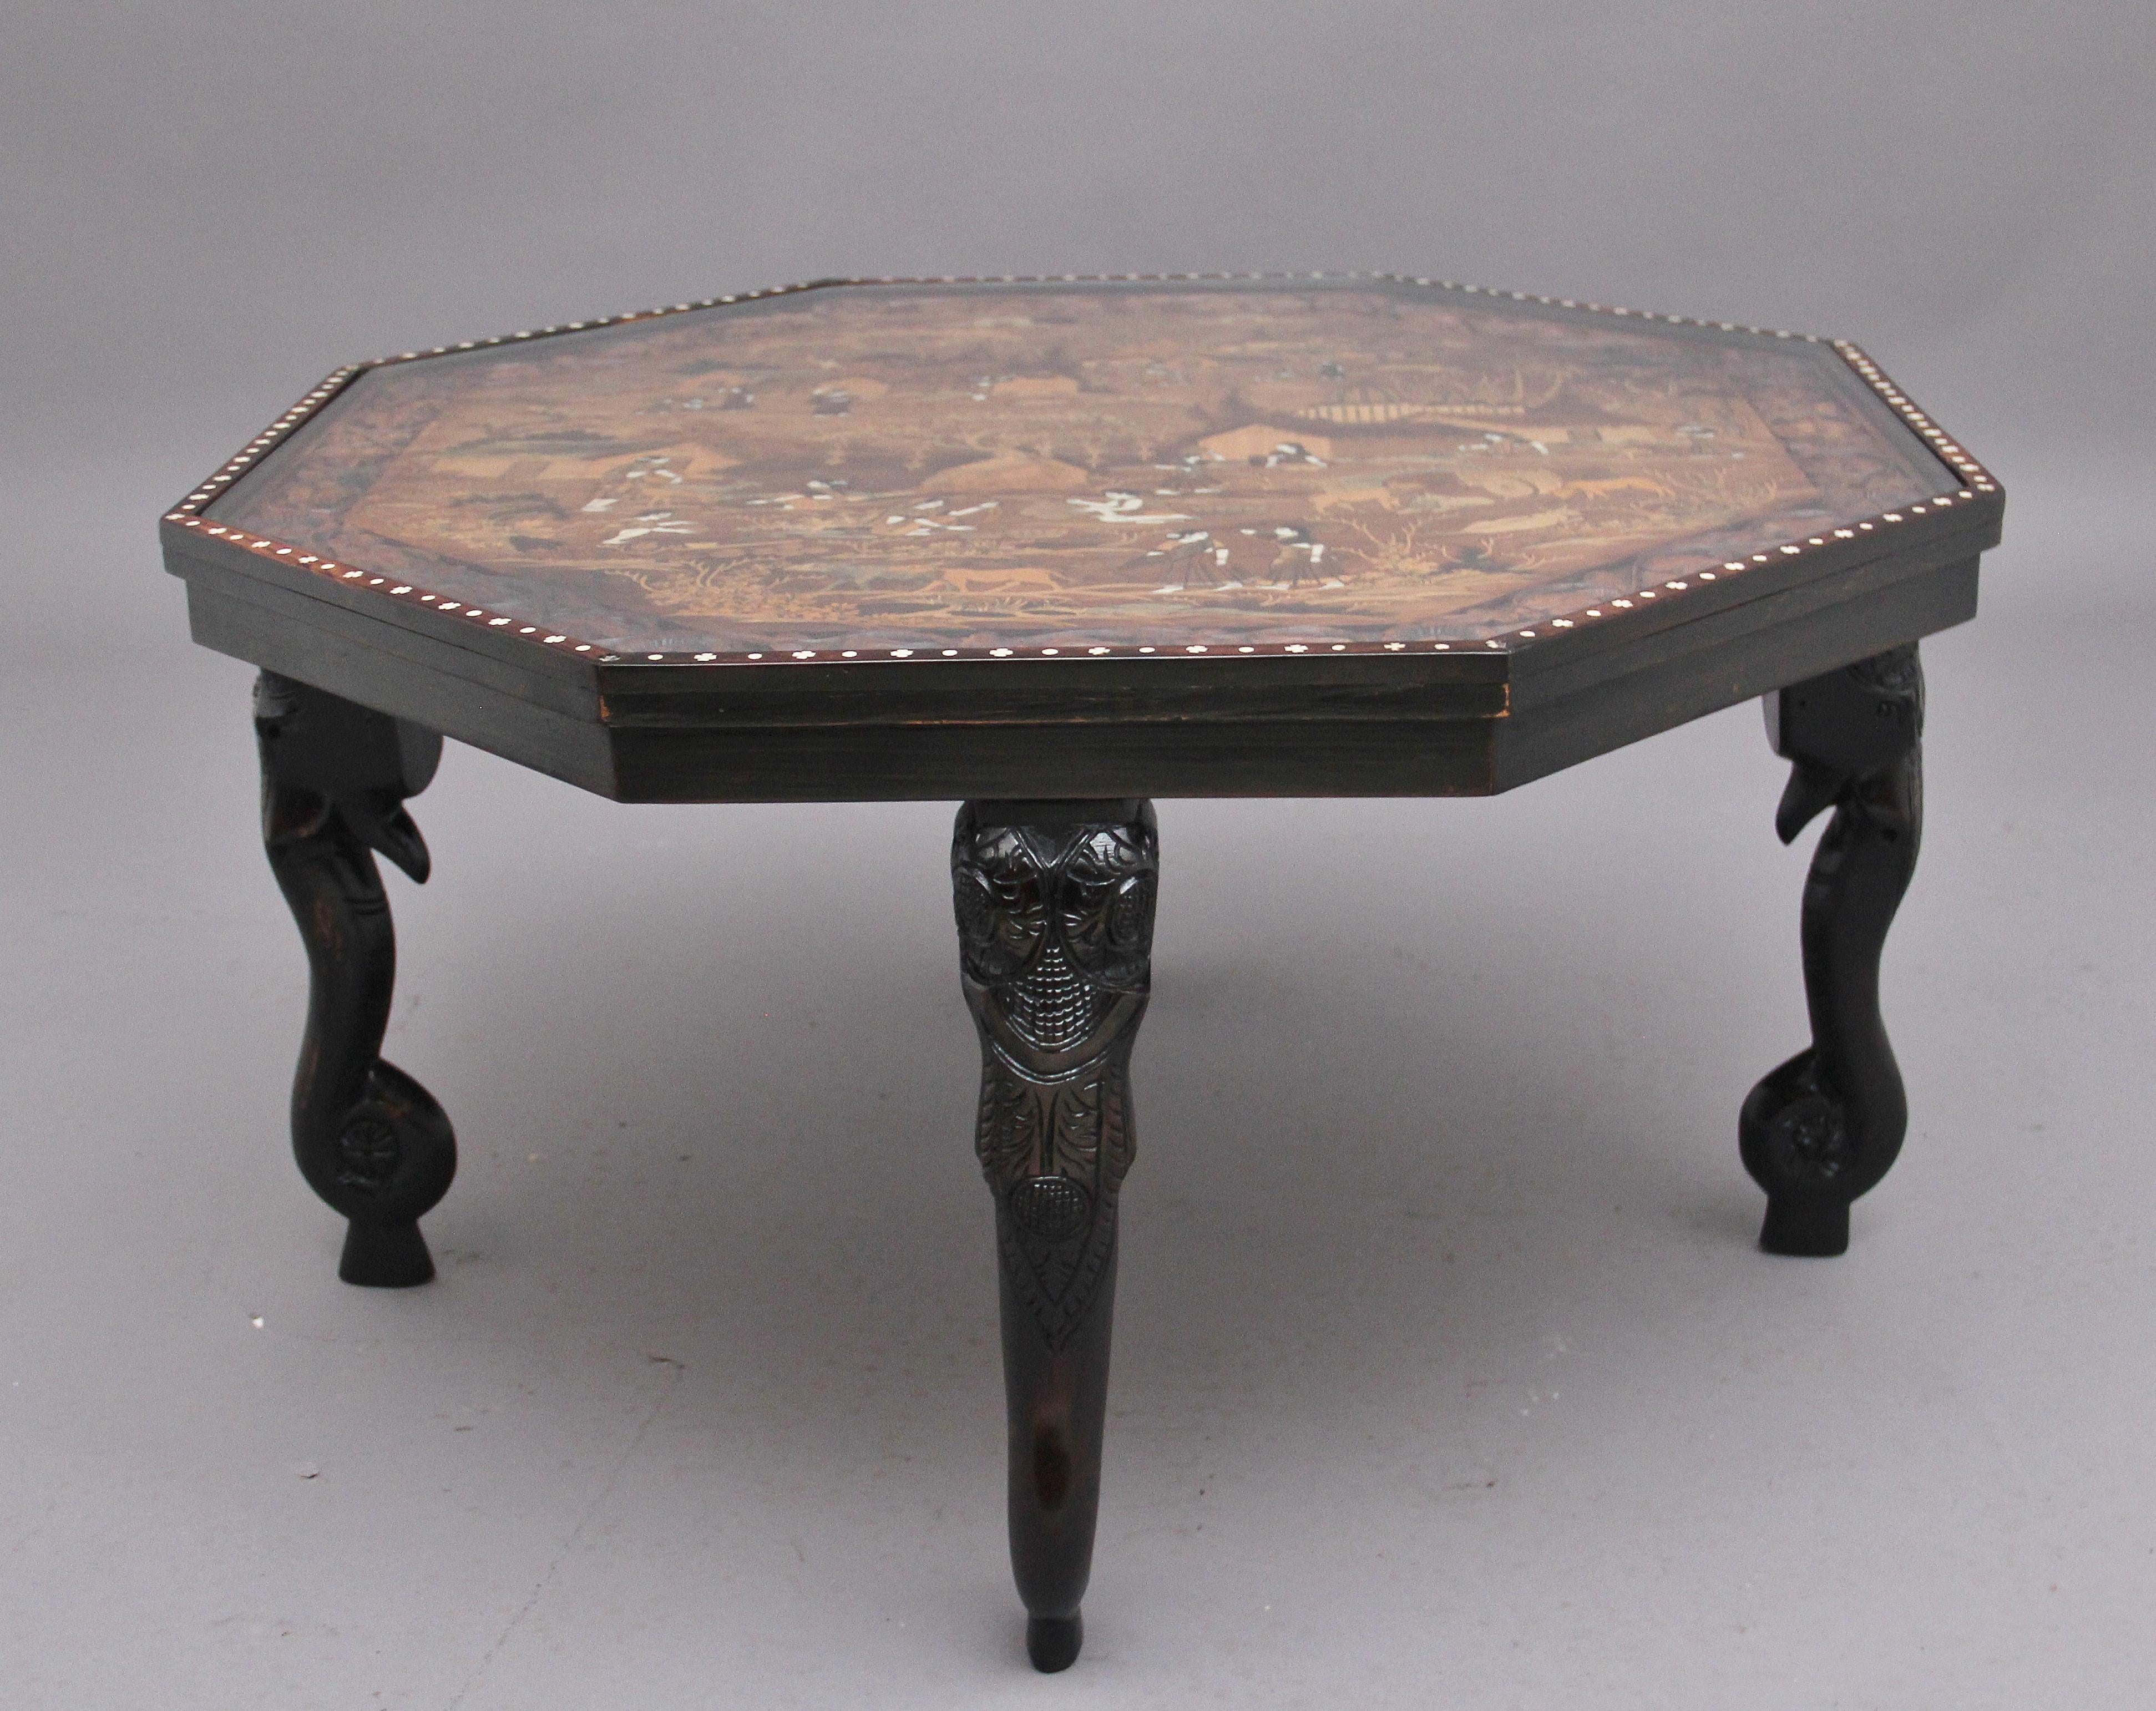 A highly decorative mid 20th century Indian ebonised occasional / coffee table, the octagon shaped top profusely inlaid depicting an Indian countryside scene and having a floral carved border, the top is covered by plate glass, supported on four